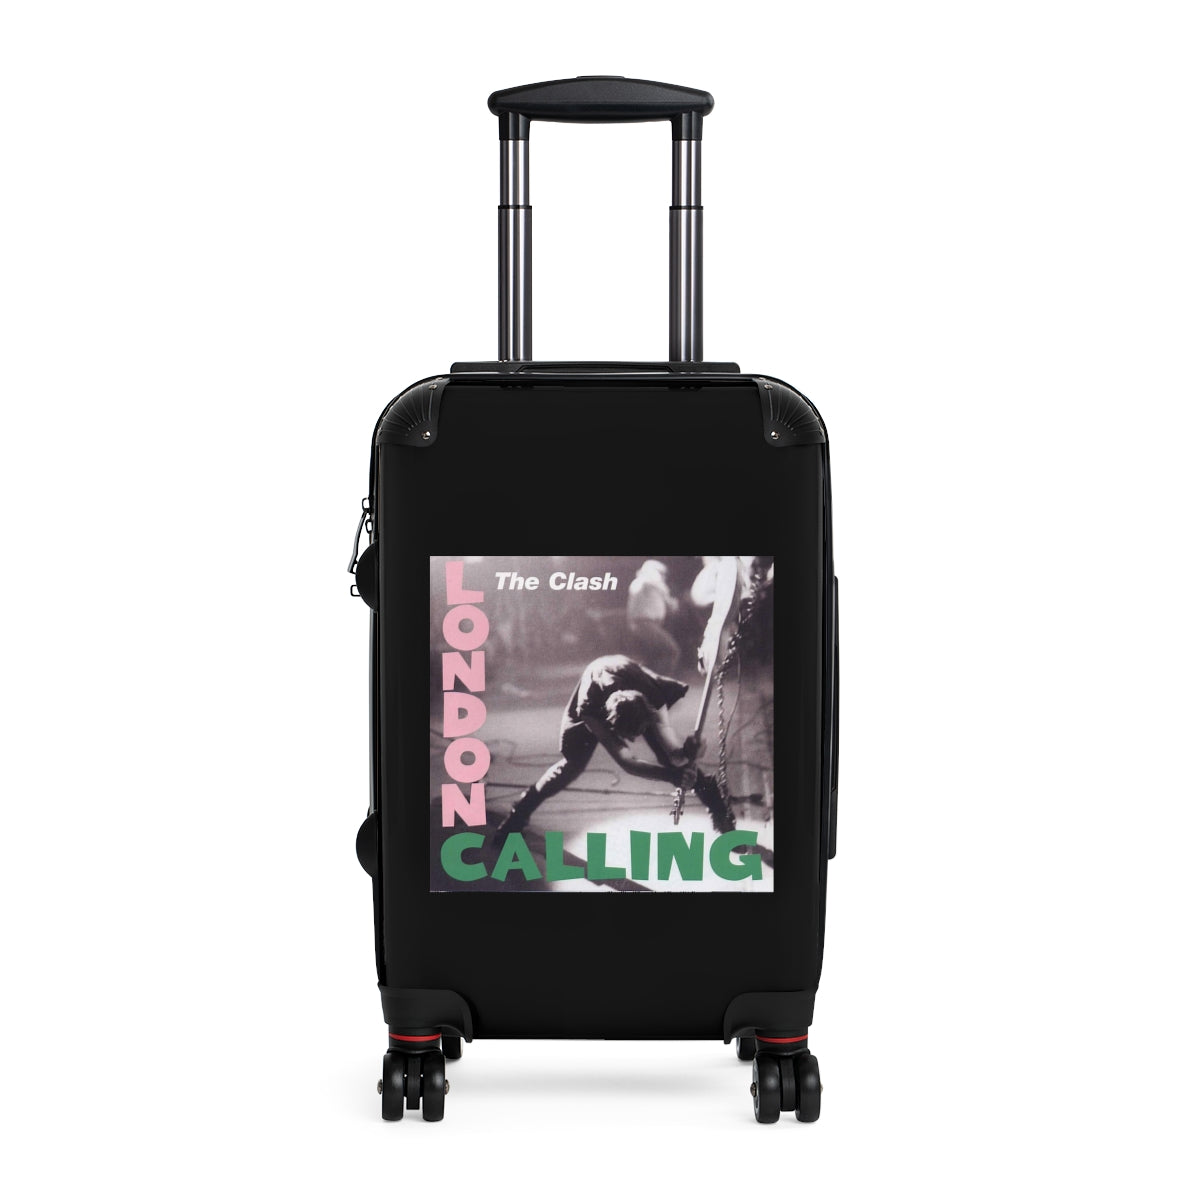 Getrott The Clash London Calling 1979 Black Cabin Suitcase Inner Pockets Extended Storage Adjustable Telescopic Handle Inner Pockets Double wheeled Polycarbonate Hard-shell Built-in Lock